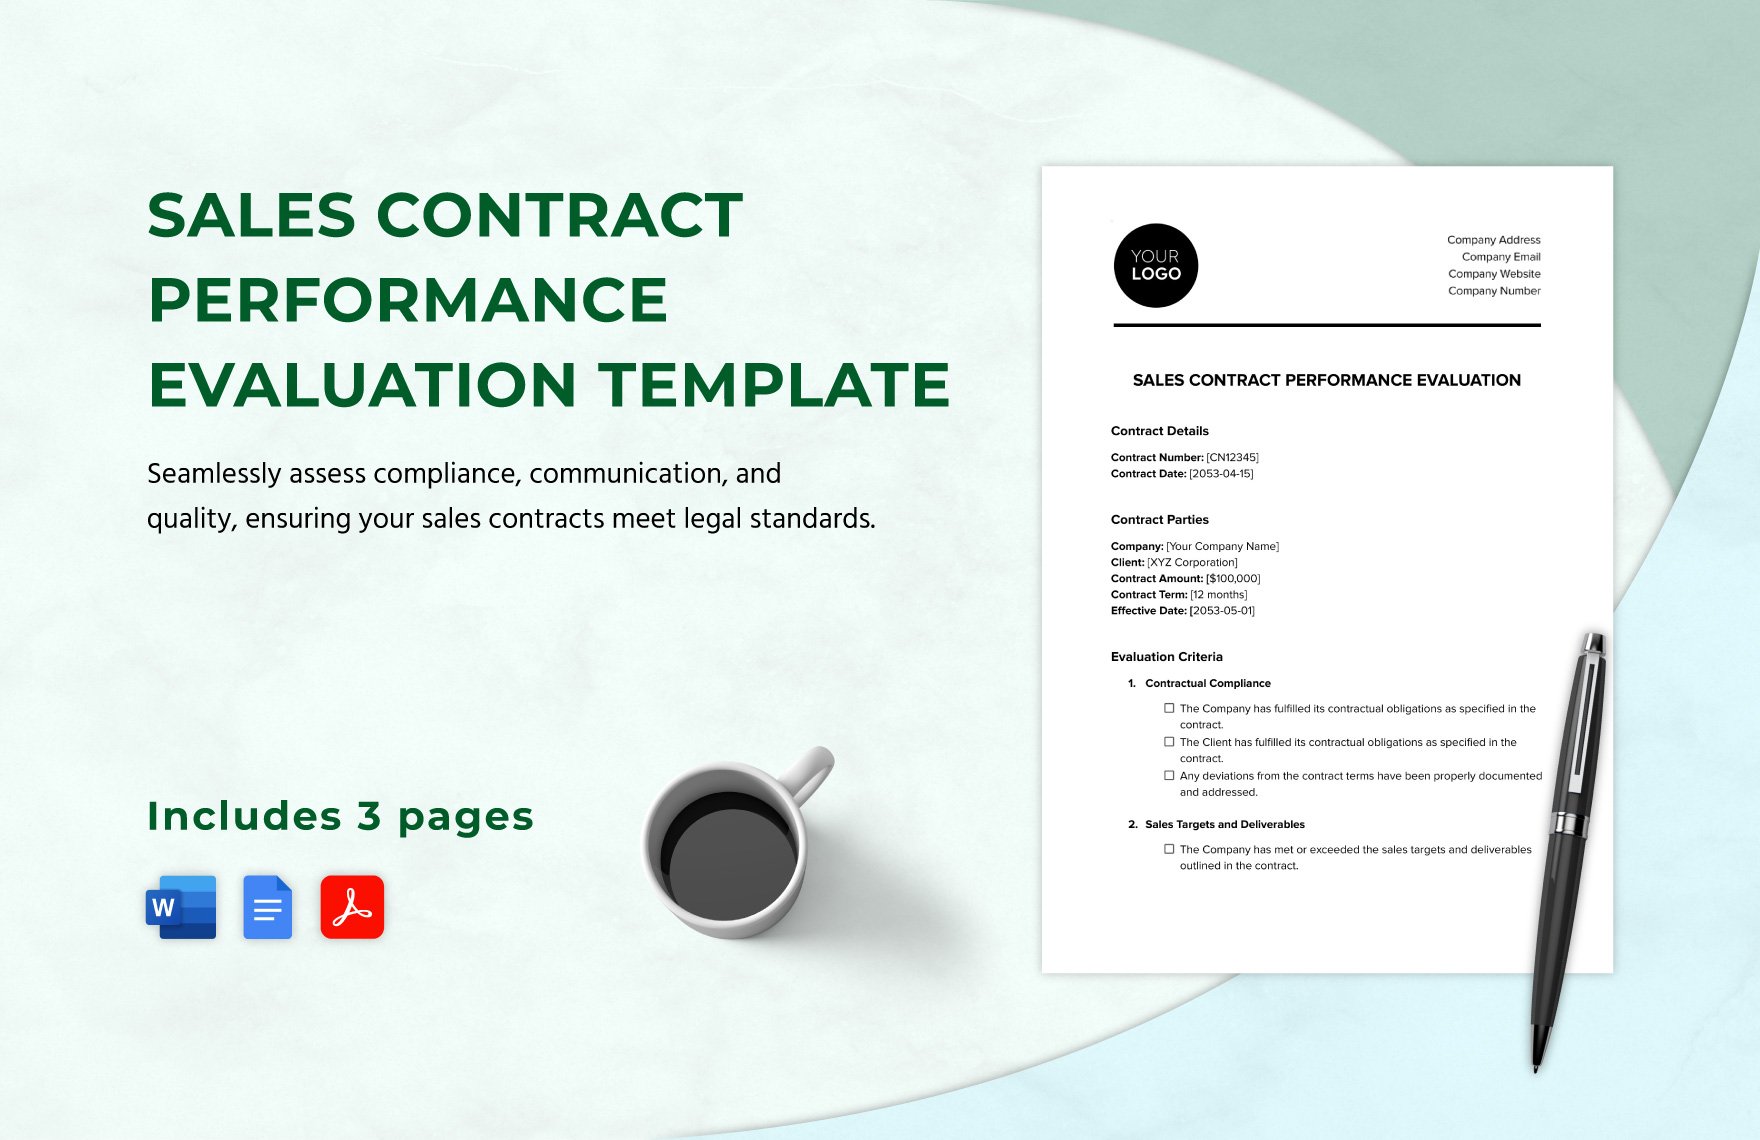 Sales Contract Performance Evaluation Template in Word, Google Docs, PDF